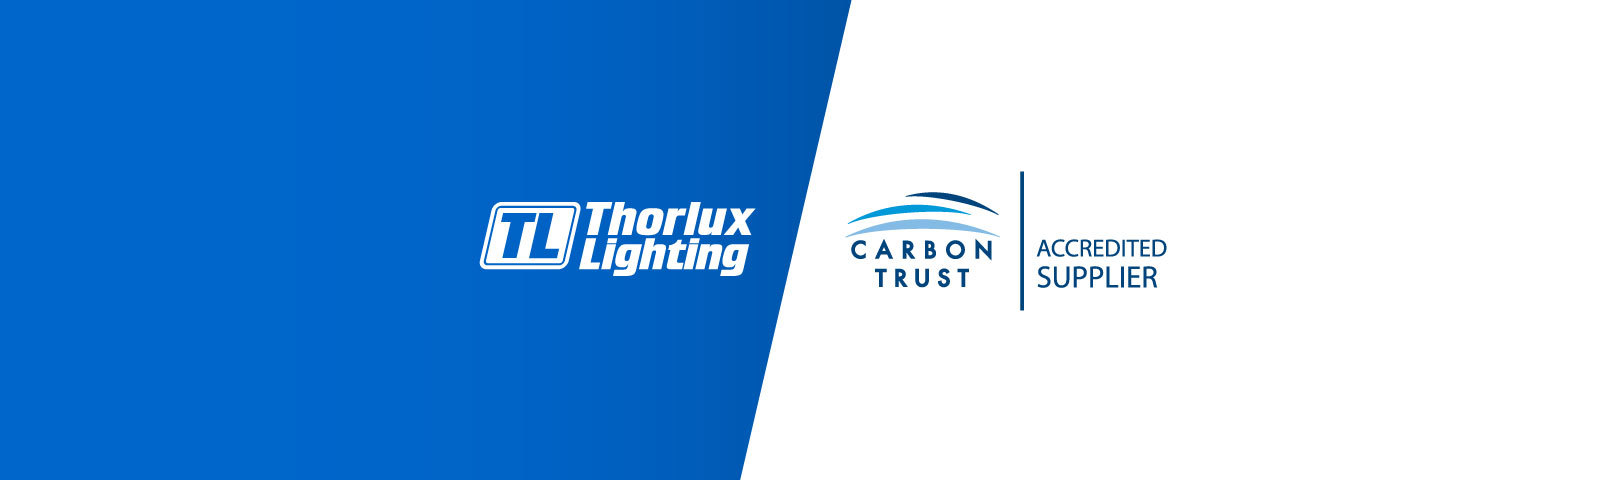 Thorlux Lighting is a Carbon Trust Accredited Supplier 